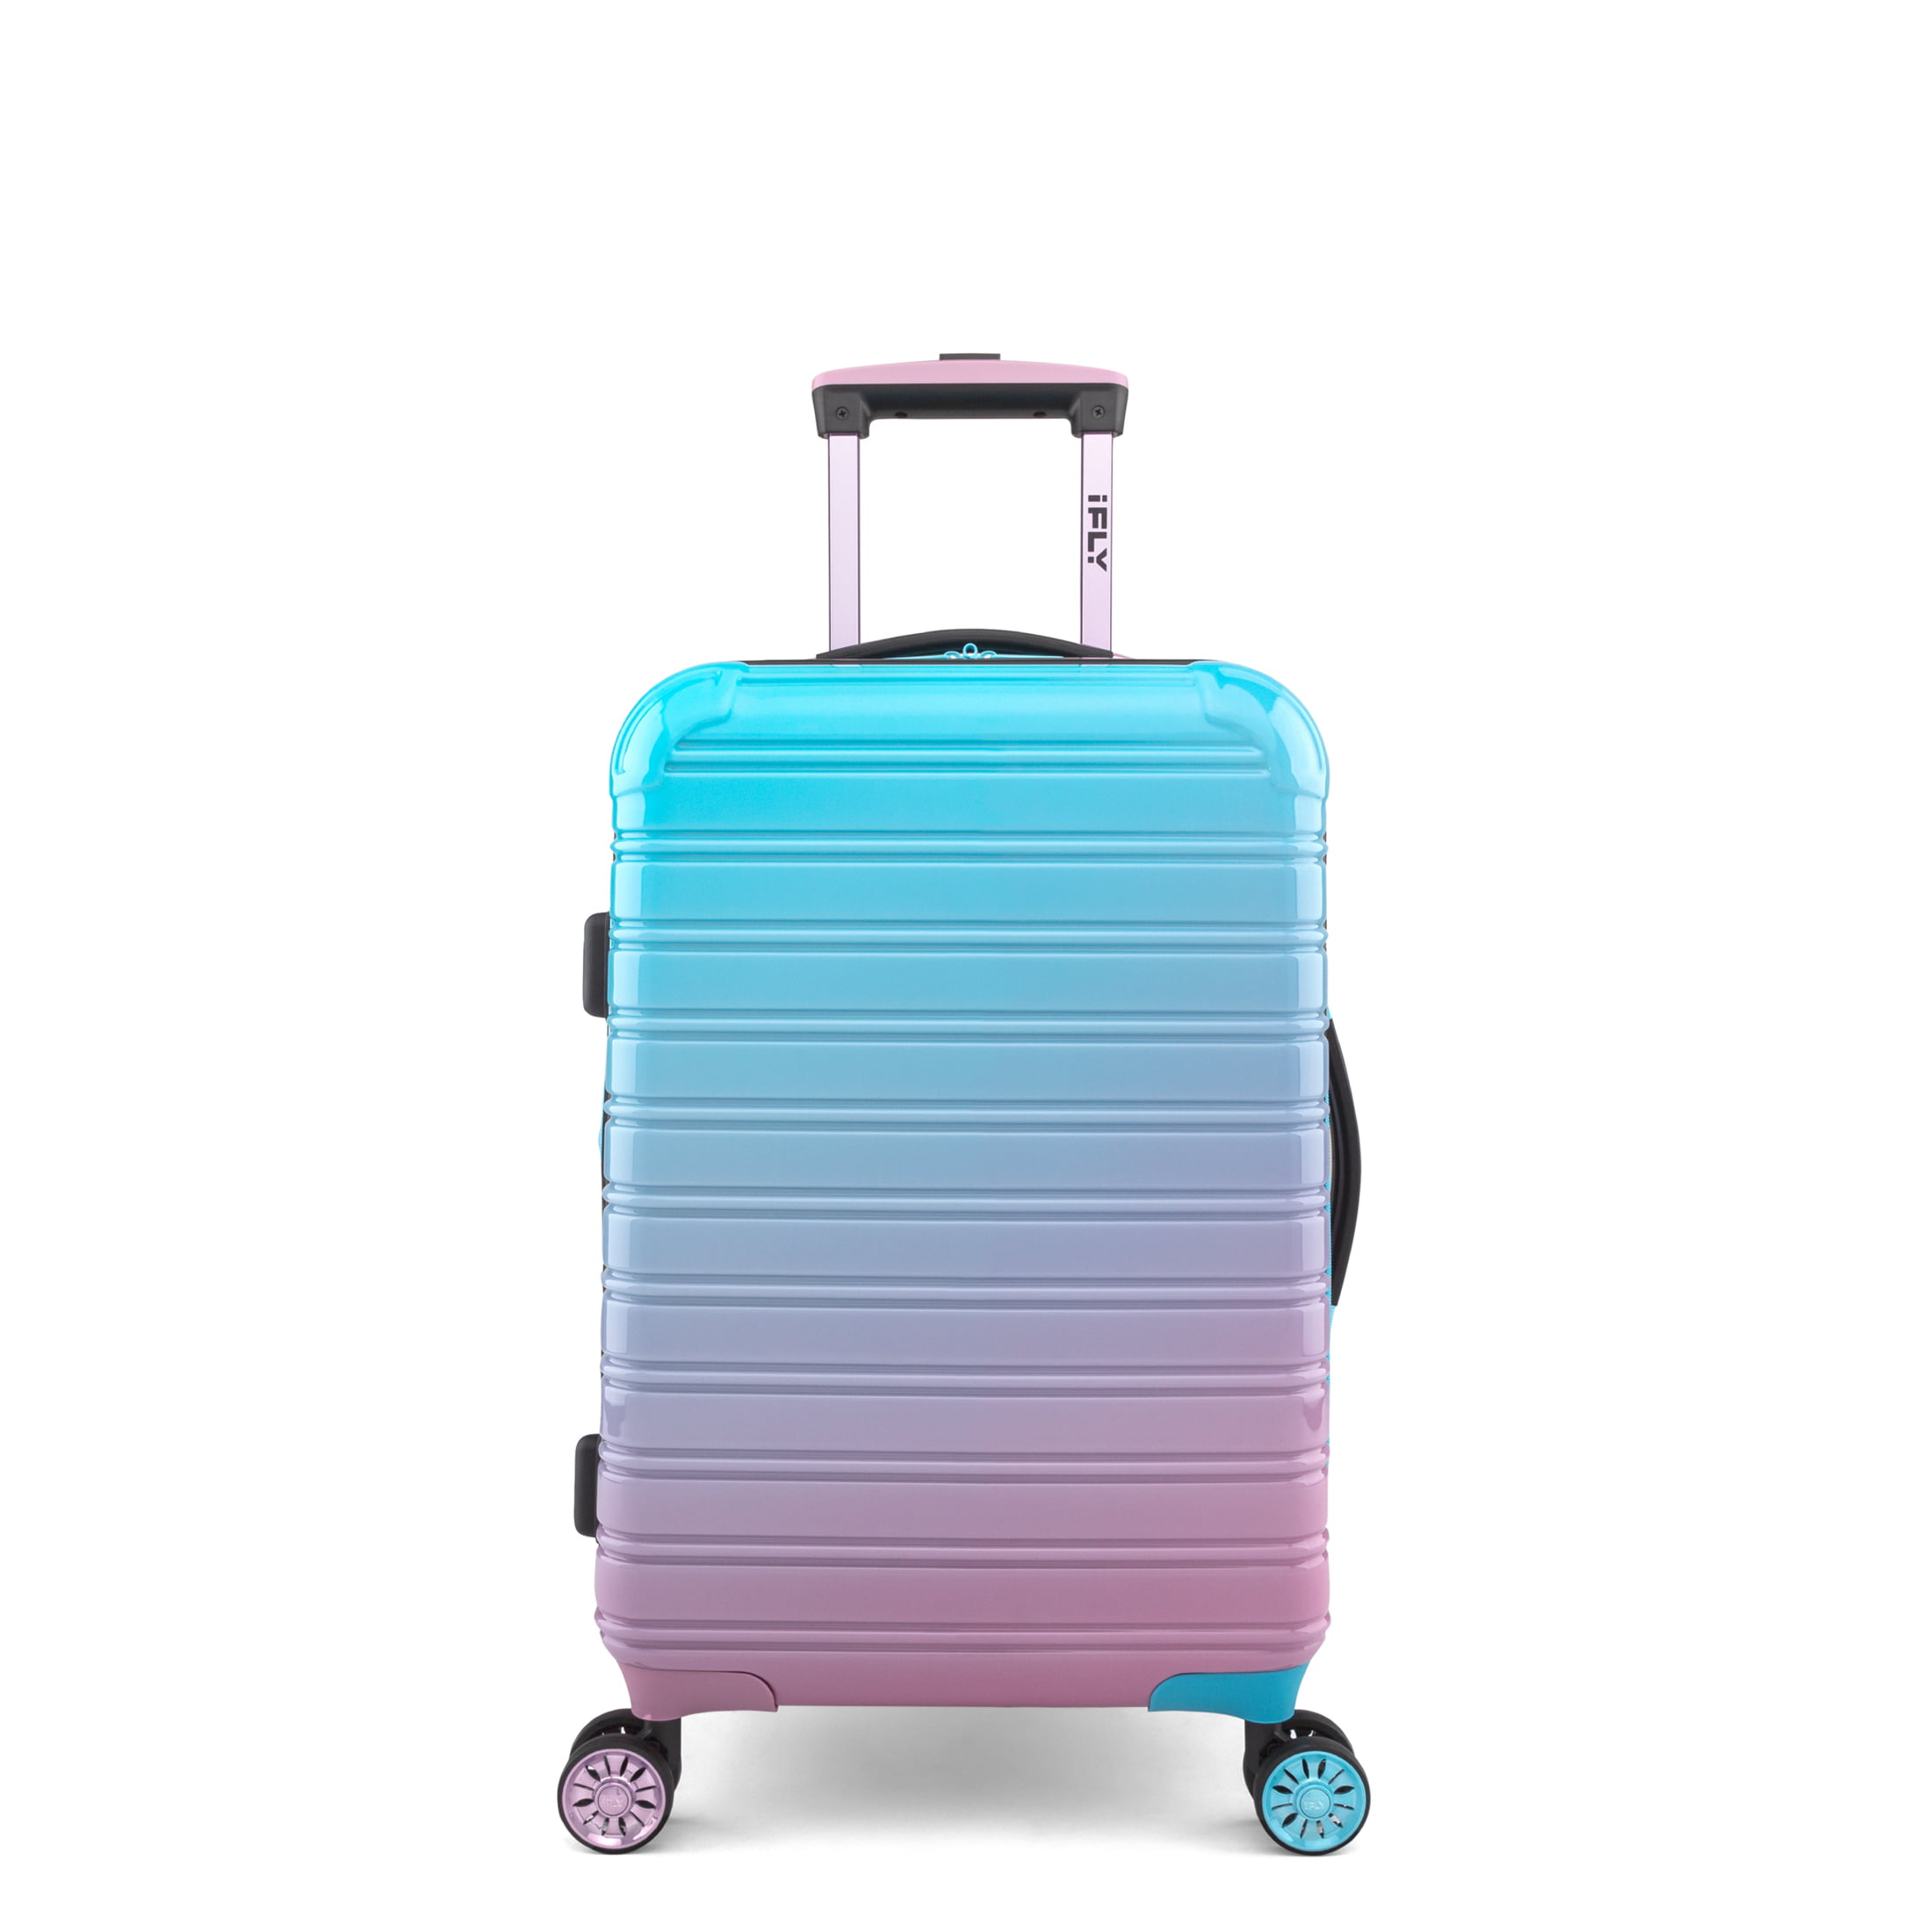 iFLY – Fibertech Cotton Candy Hardside Luggage 20 Inch Carry-On ...